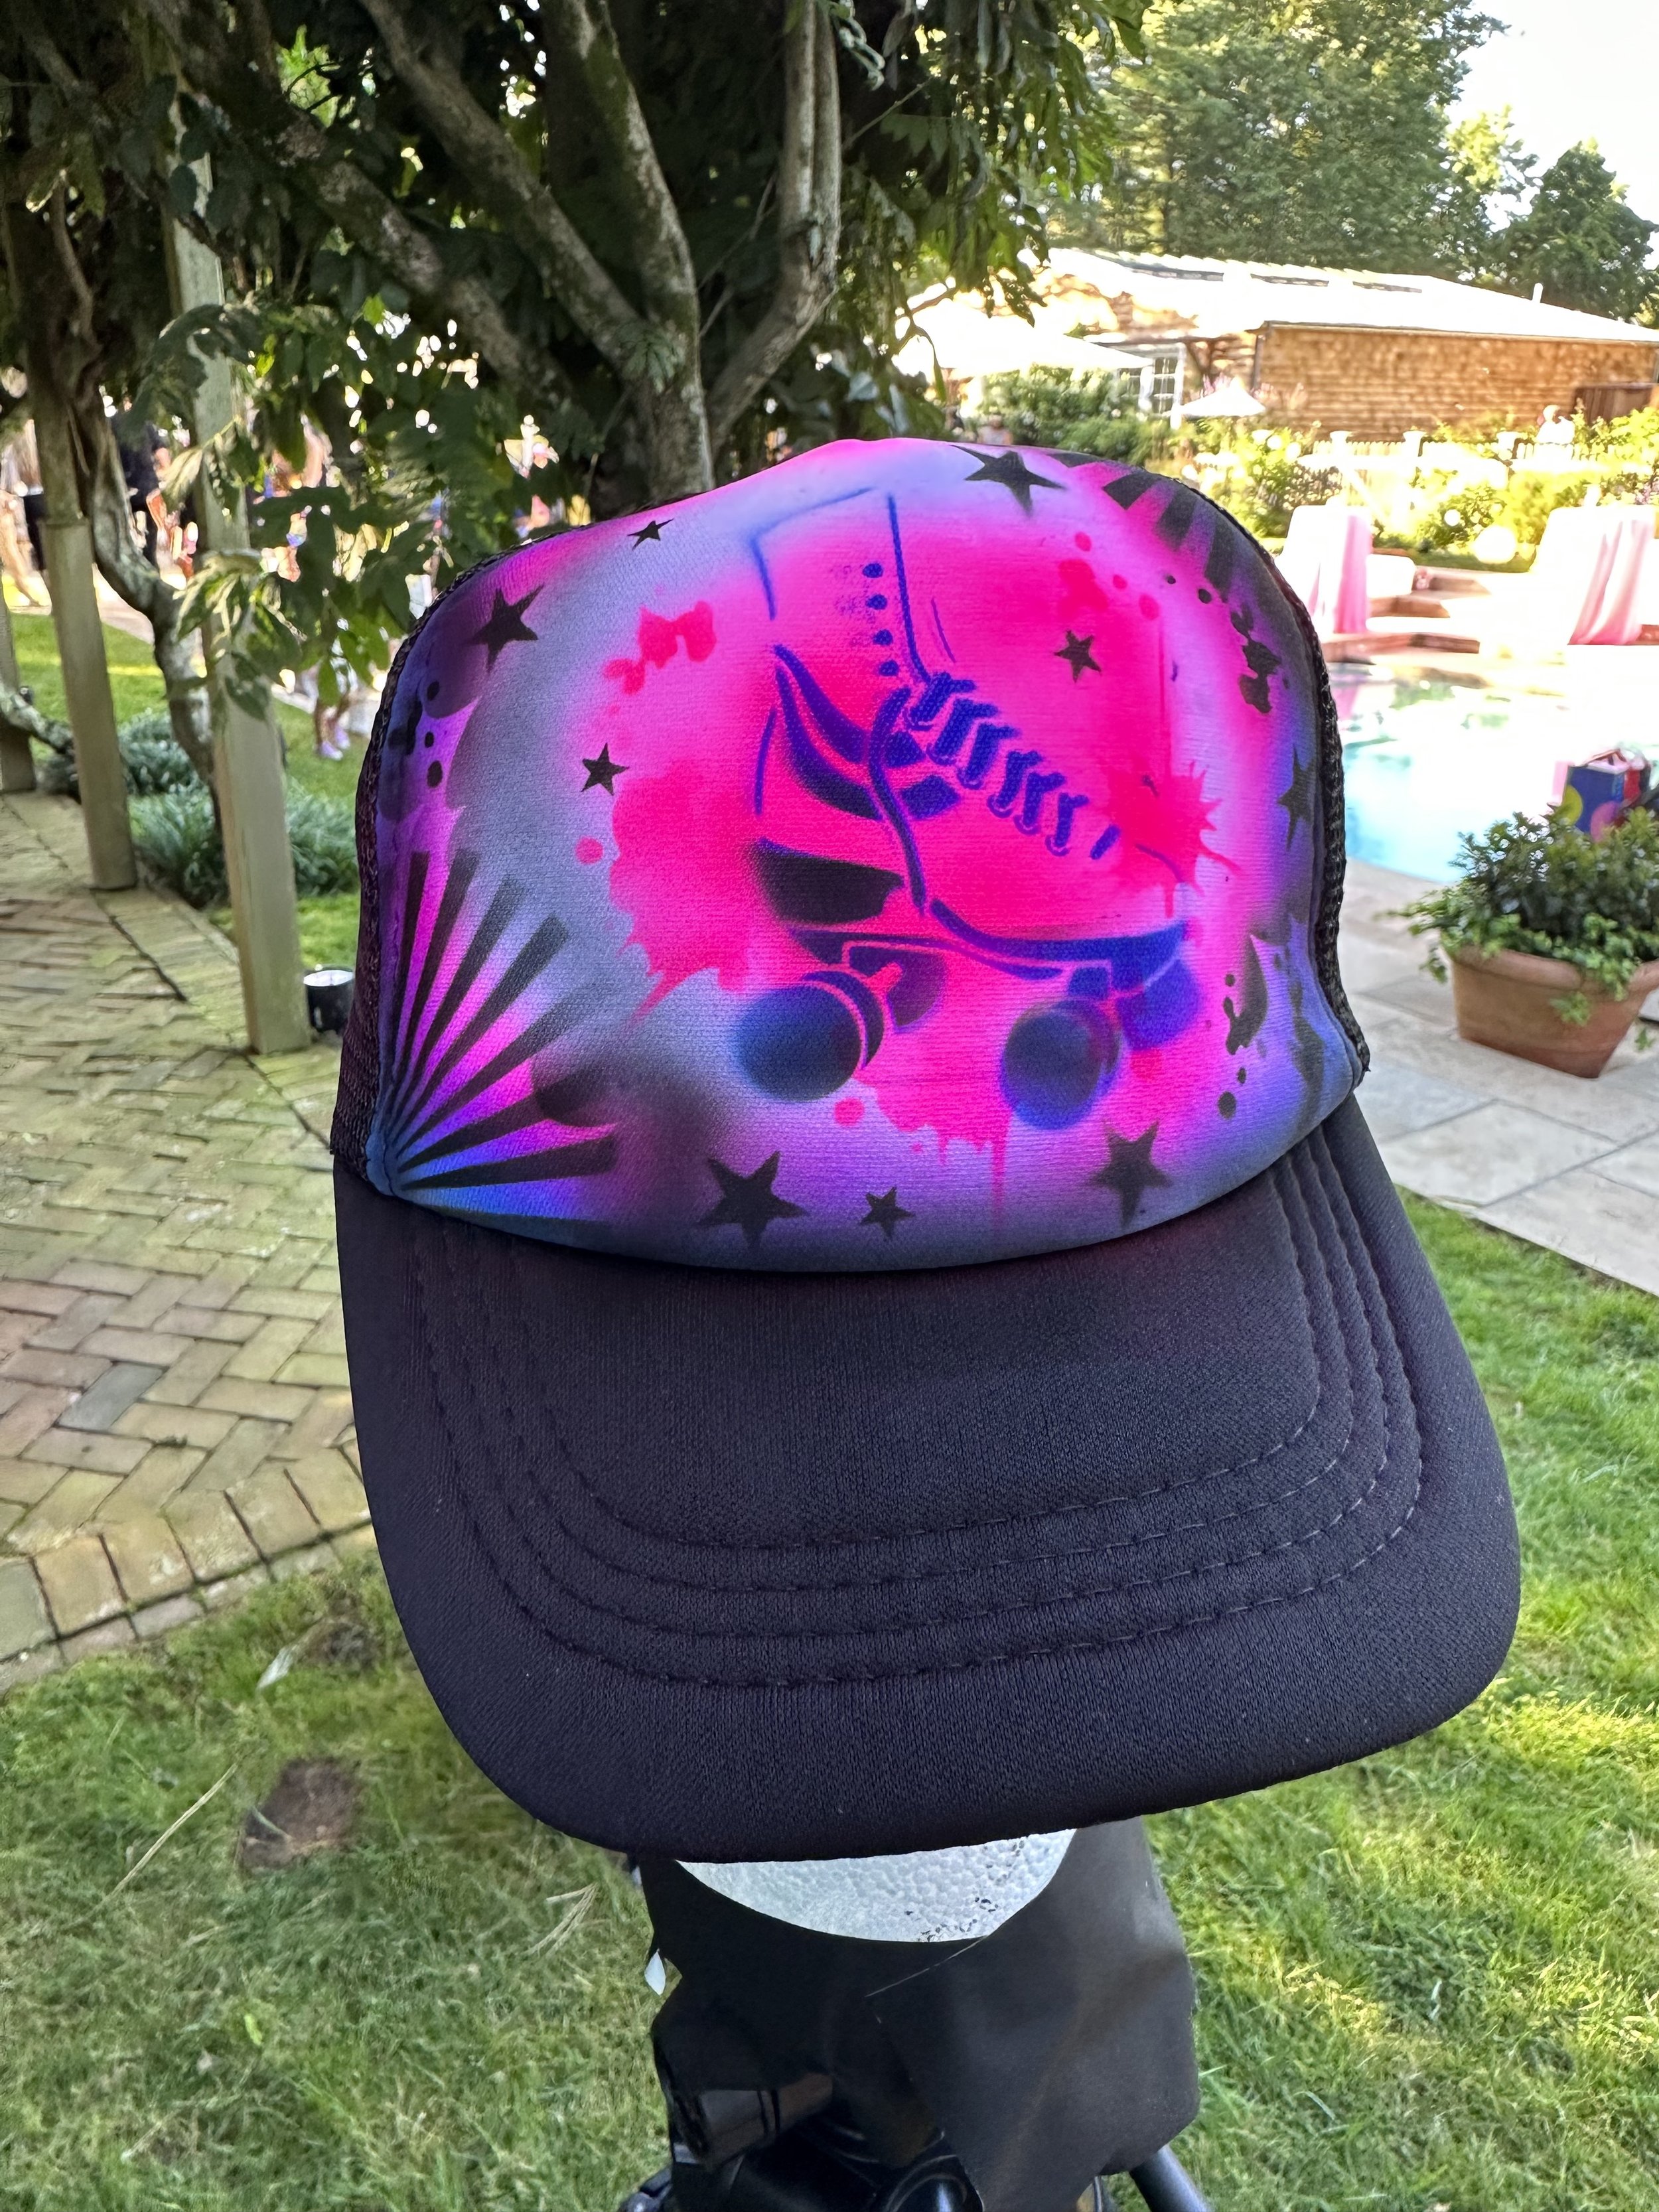 Airbrush Hat for Party Near me New York City.jpg